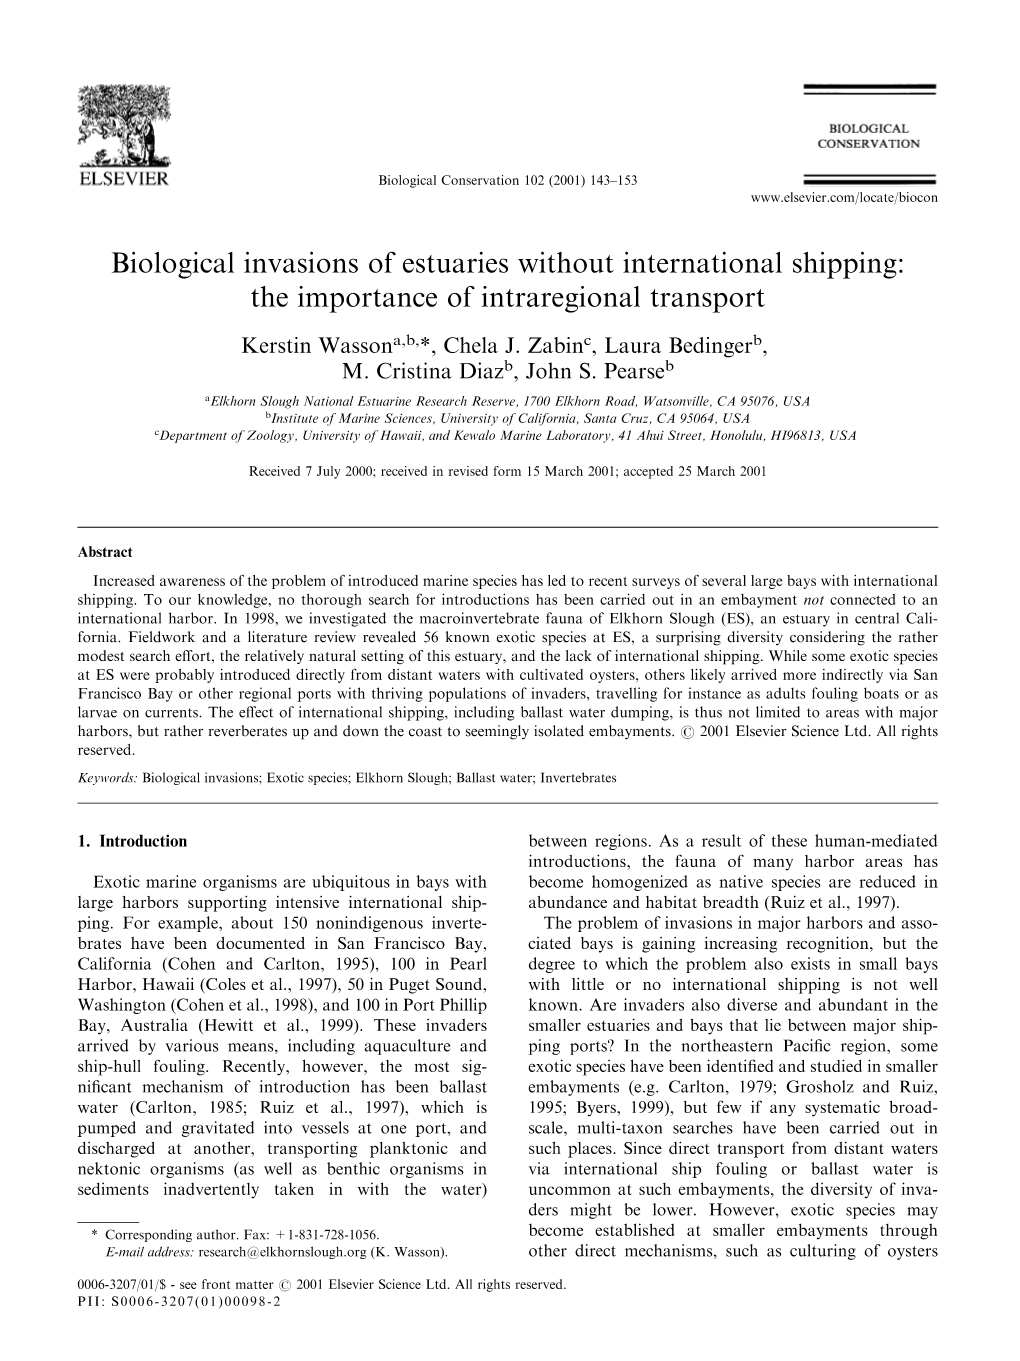 Biological Invasions of Estuaries Without International Shipping: the Importance of Intraregional Transport